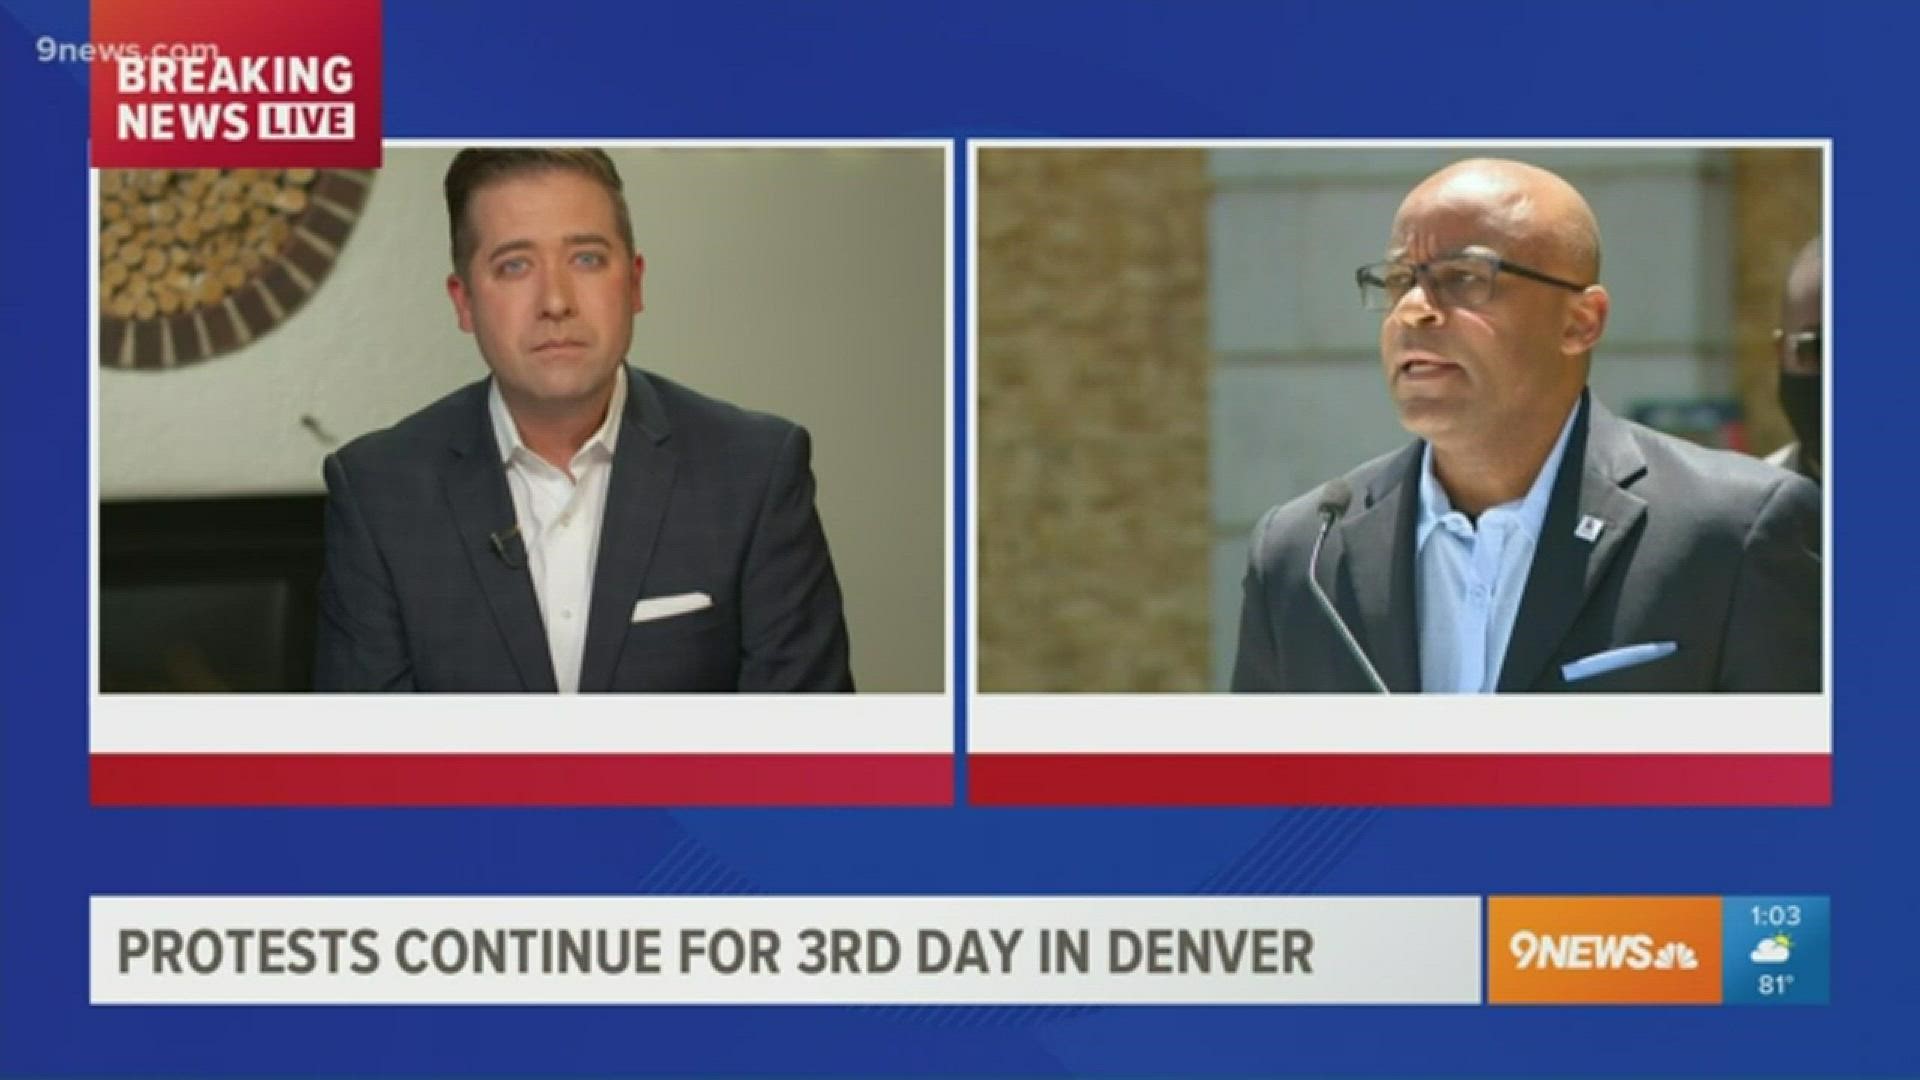 Denver Mayor Michael Hancock announced a curfew that will go from 8 p.m. to 5 a.m. through Monday morning during a press conference on Saturday.